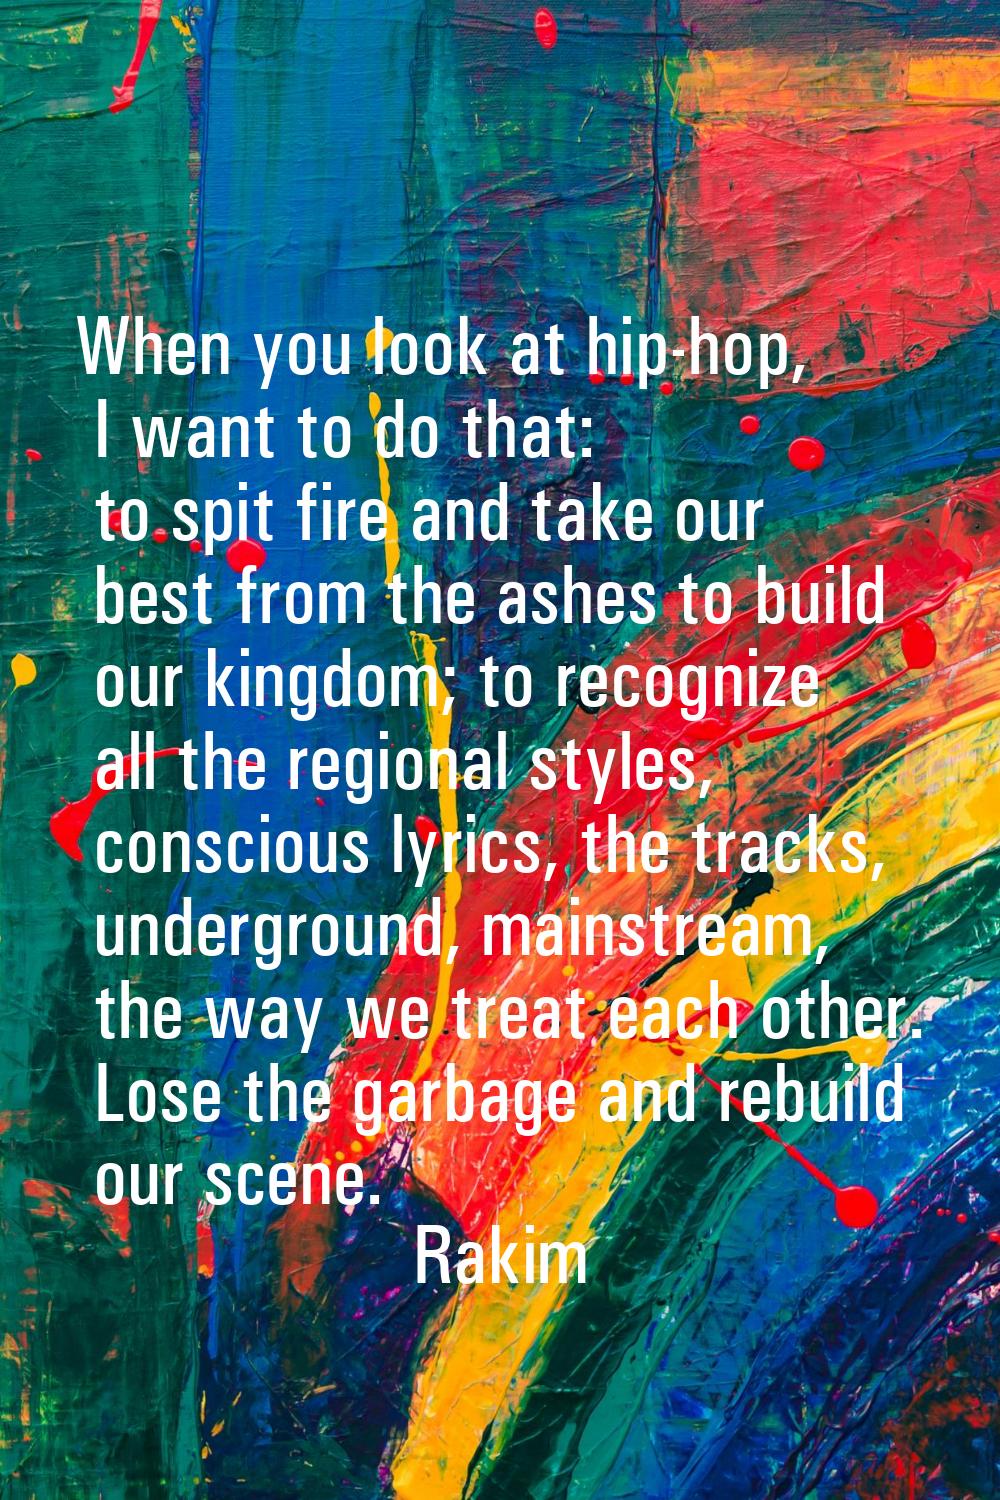 When you look at hip-hop, I want to do that: to spit fire and take our best from the ashes to build